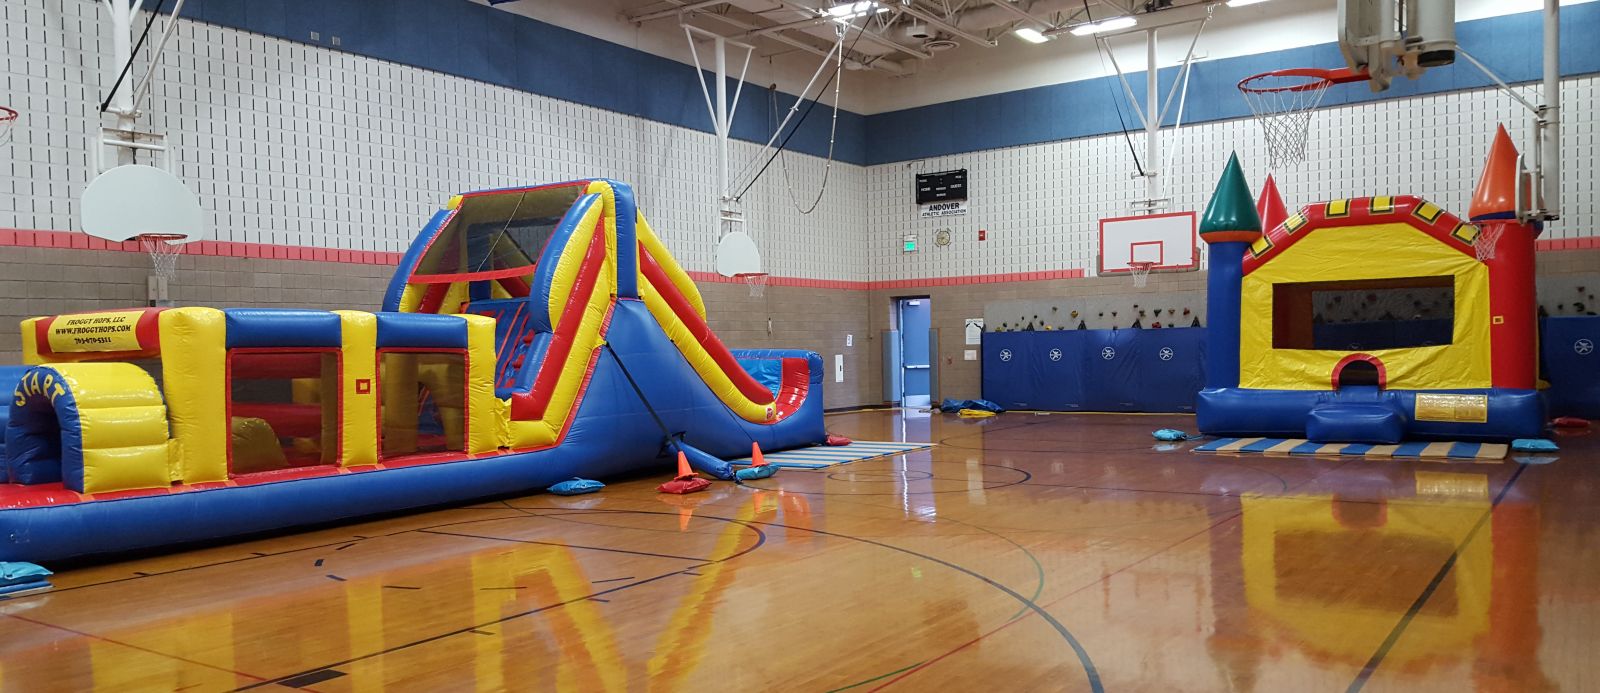 Inflatable Obstacle Course and Bounce House in school gym